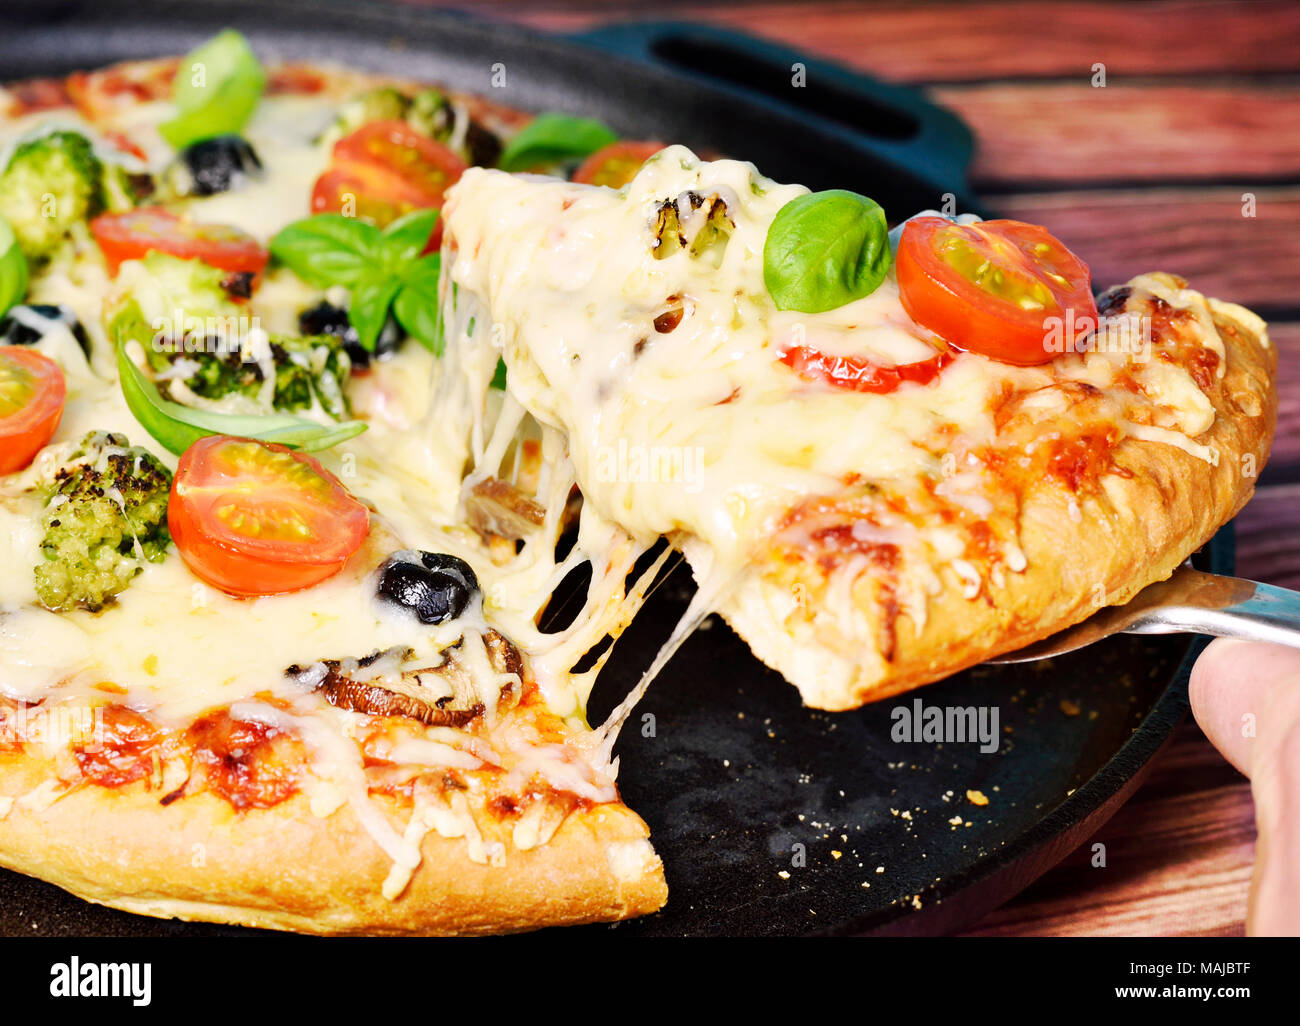 Fresh pizza in a pizza pan. Vegetarian pizza or vegetable pizza with broccoli, tomatoes, mushrooms, olives and cheese. Cheesy pizza, homemade pizza. Stock Photo